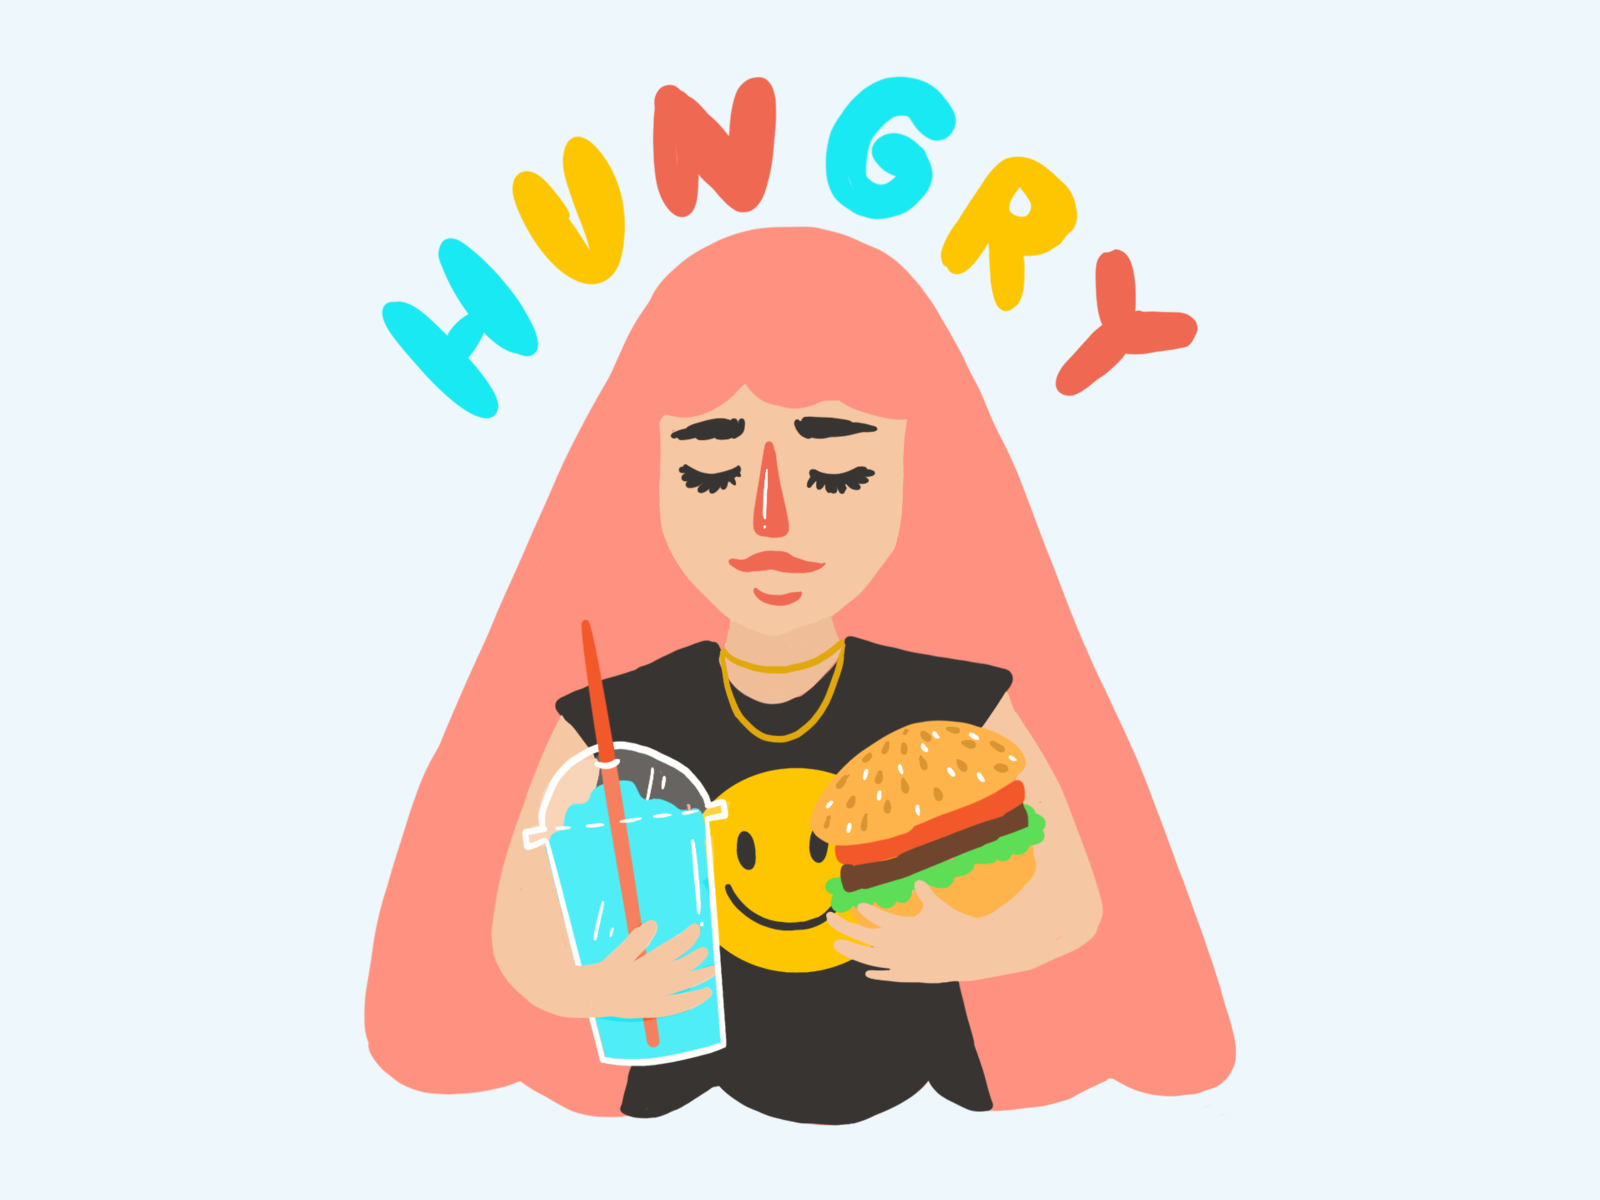 Hungry! by Samantha Lopez on Dribbble